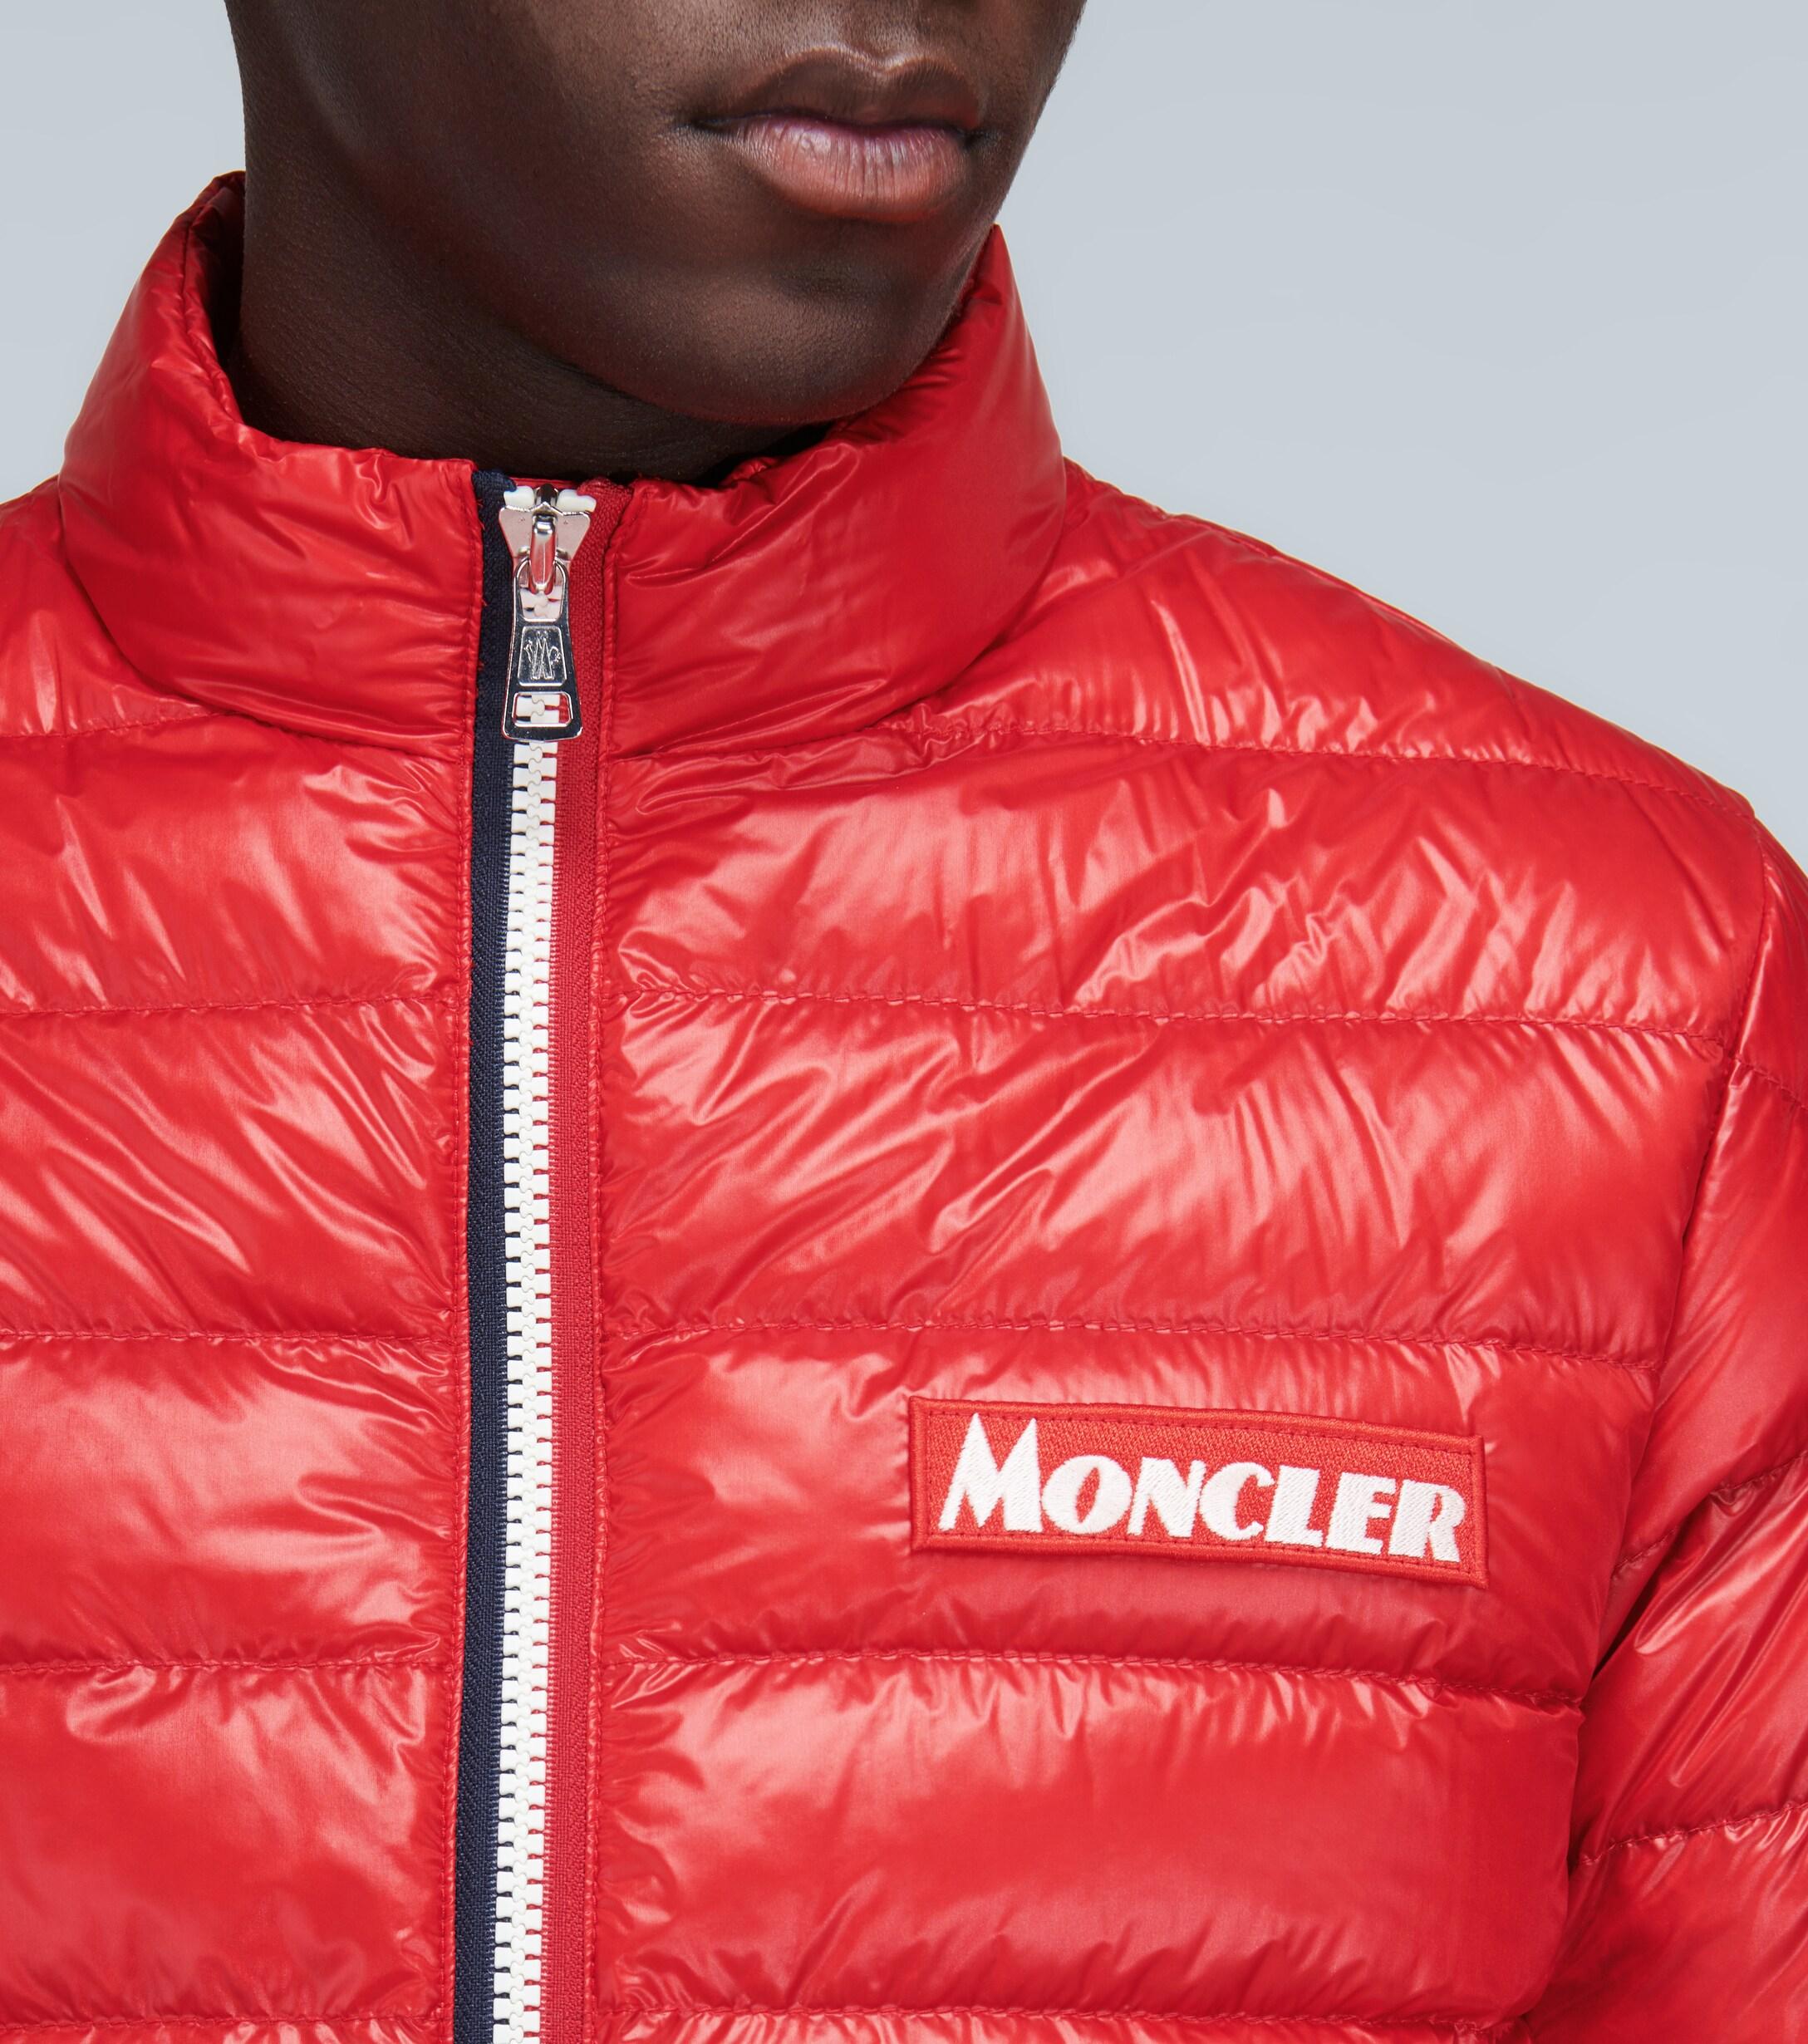 Moncler Synthetic Petichet Jacket in Dark_red (Red) for Men - Save 41% |  Lyst